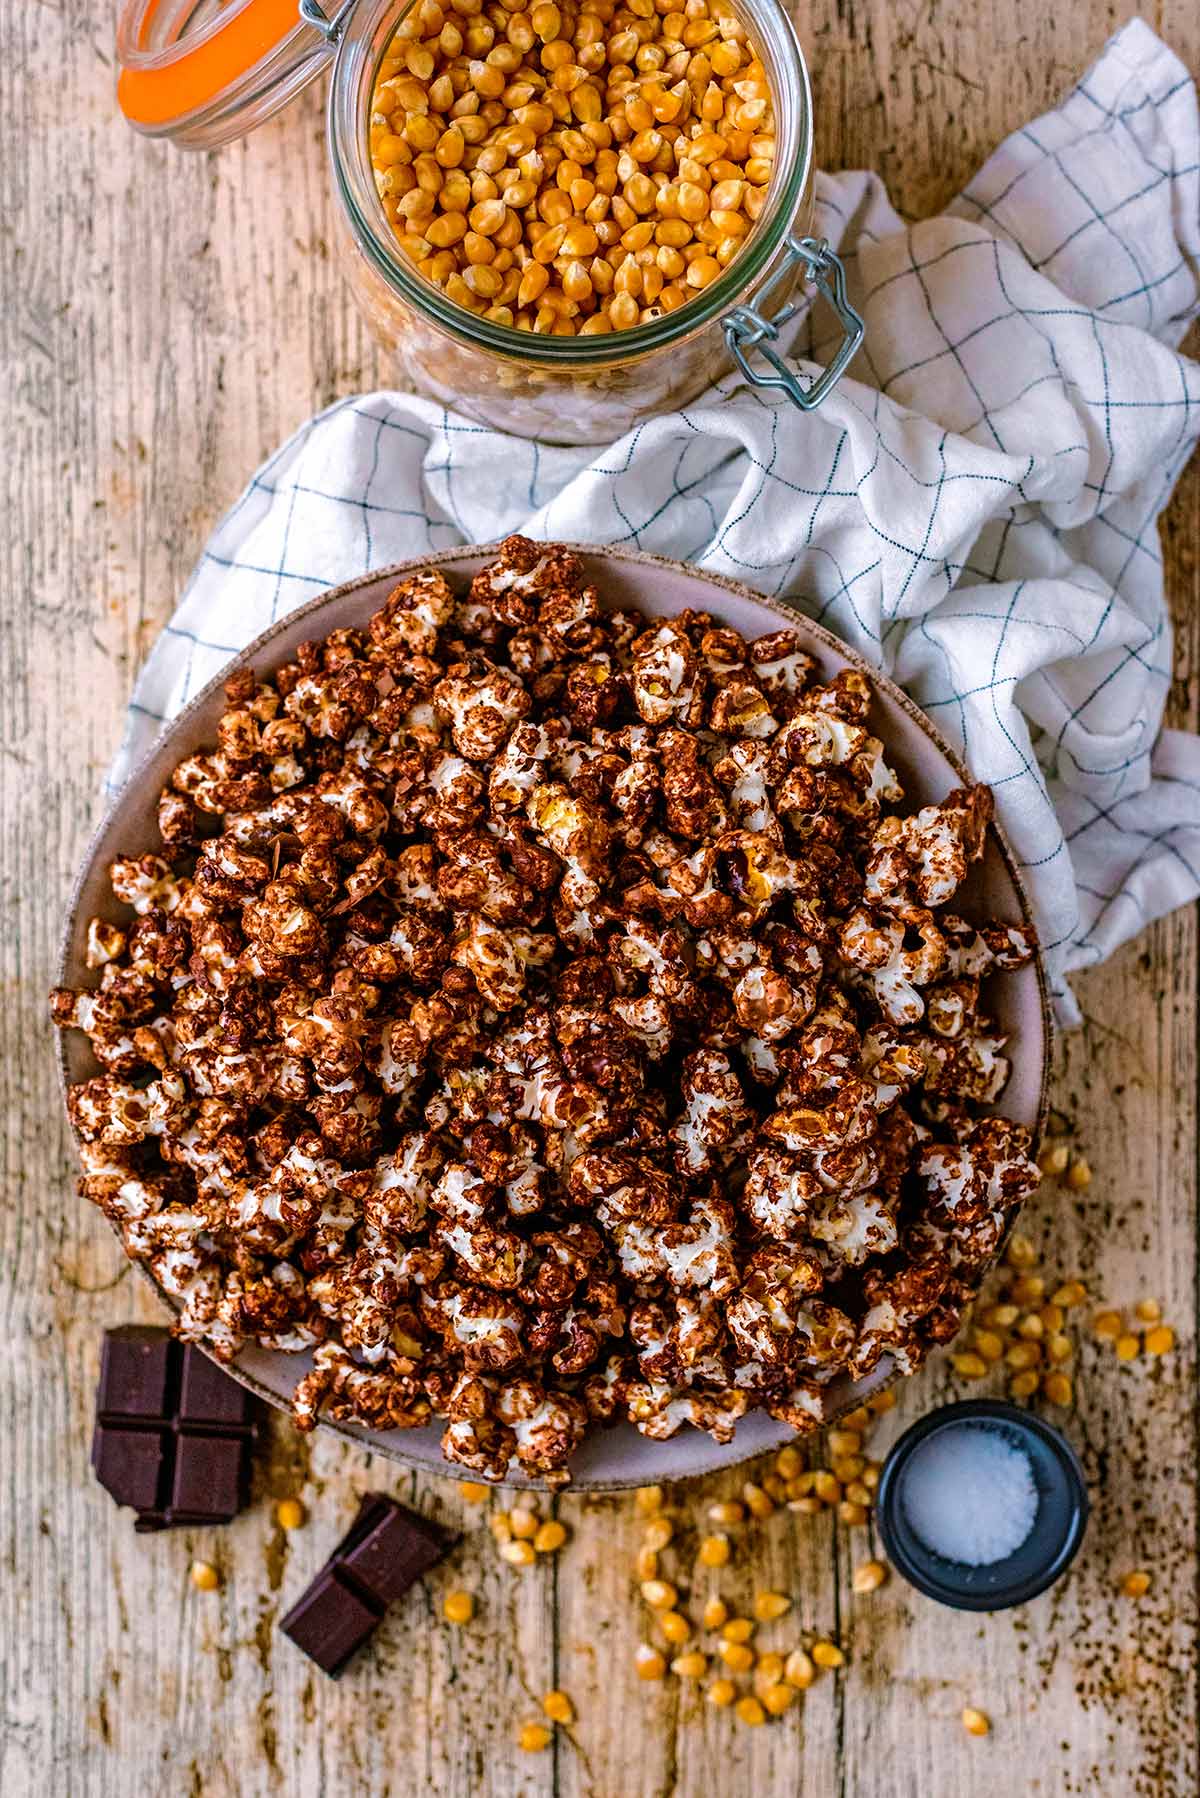 A bowl of chocolate covered popcorn next to some kernels, salt and chocolate.